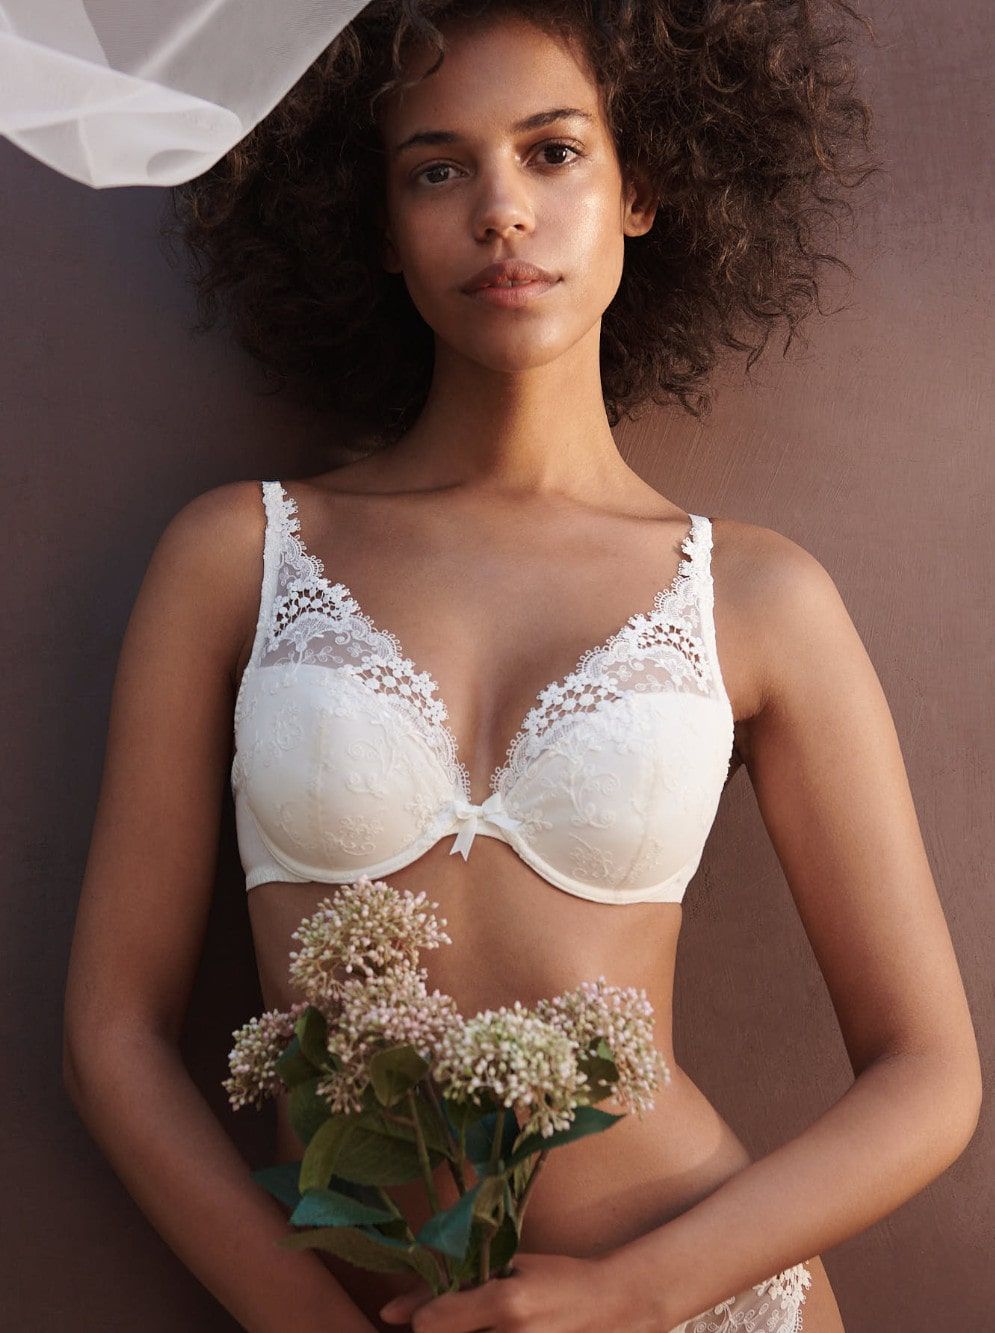 Andres Sarda TYNG push-up bra removable pads in white